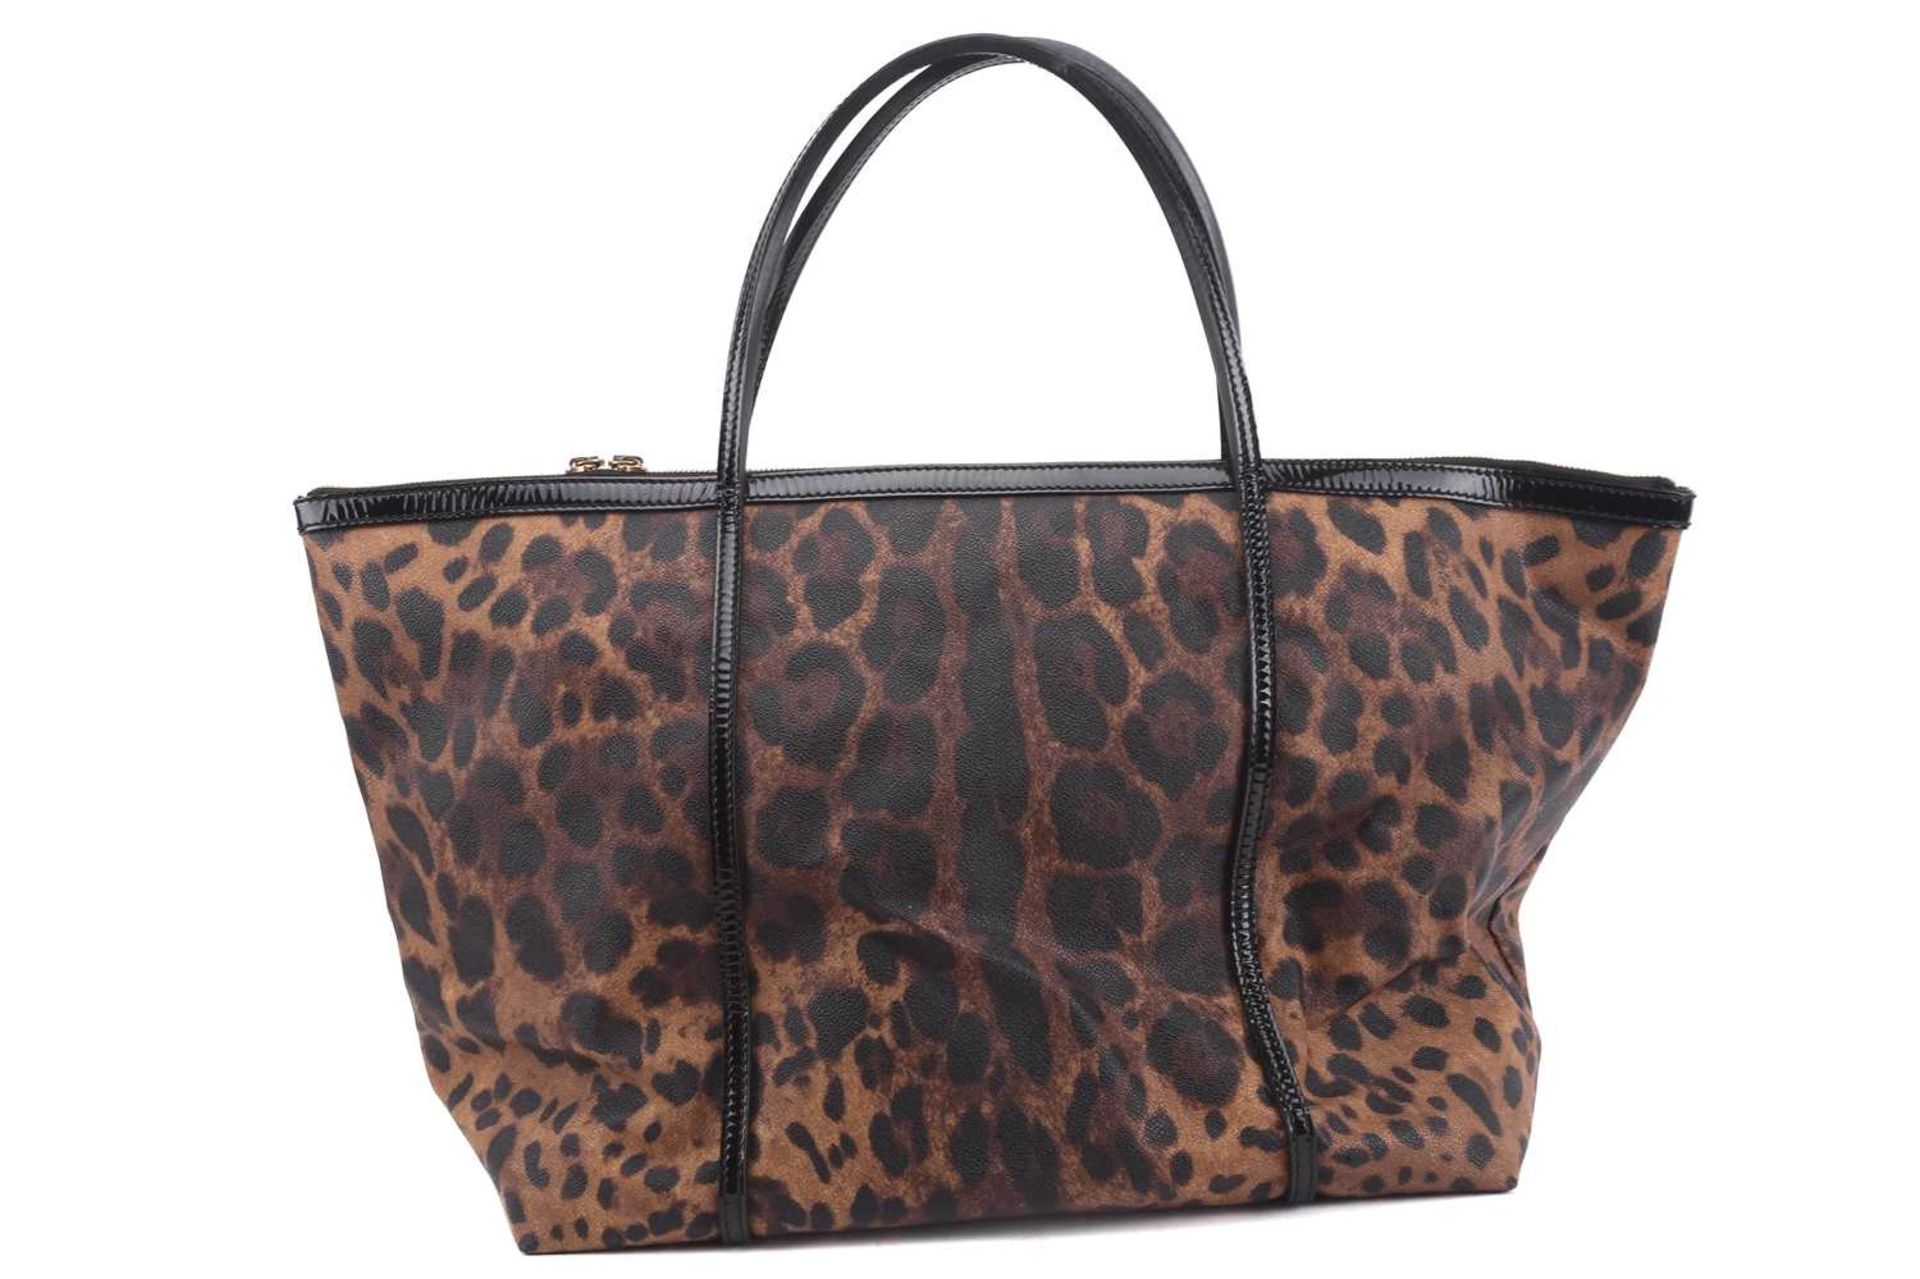 Dolce & Gabbana - a large leopard print 'Escape' shopper tote with black patent leather trims and - Image 2 of 13